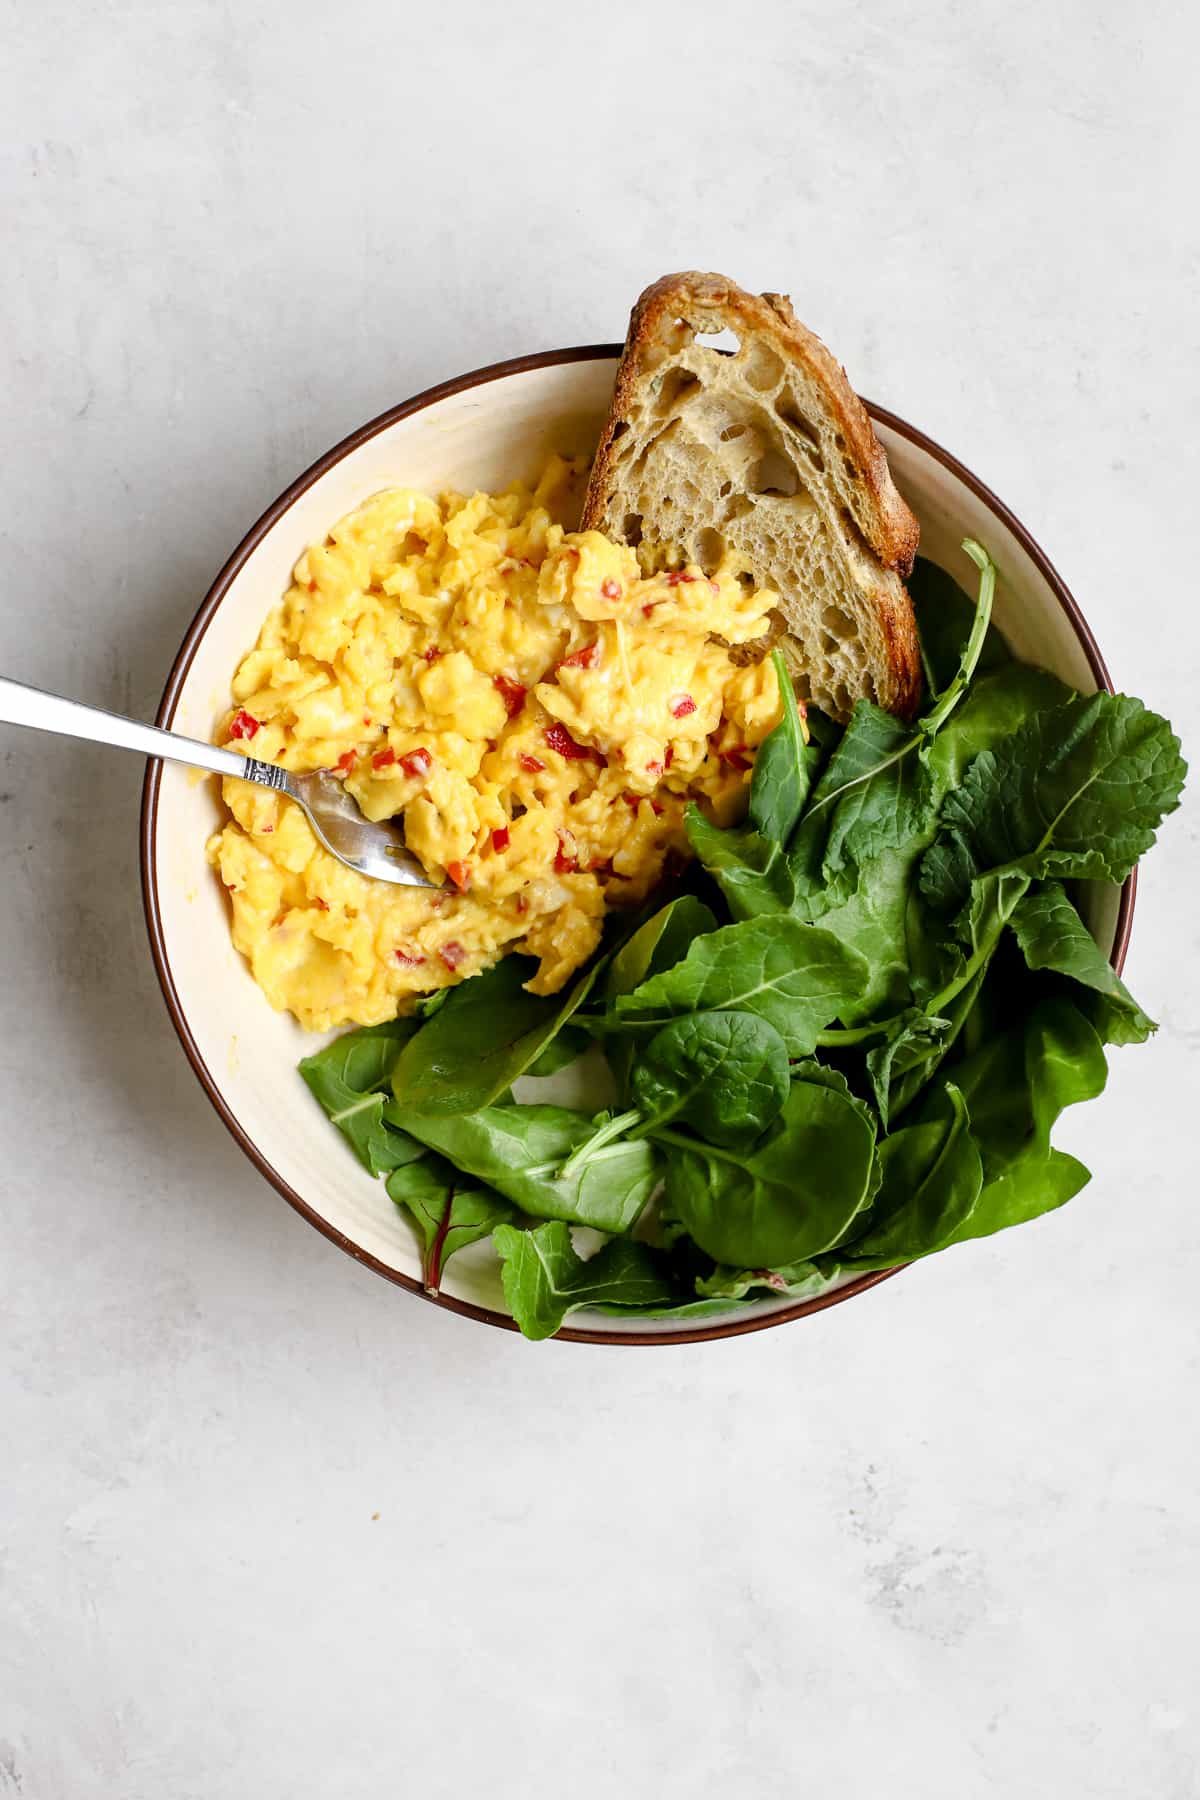 Chilli scrambled eggs in bowl with sourdough toast and greens.